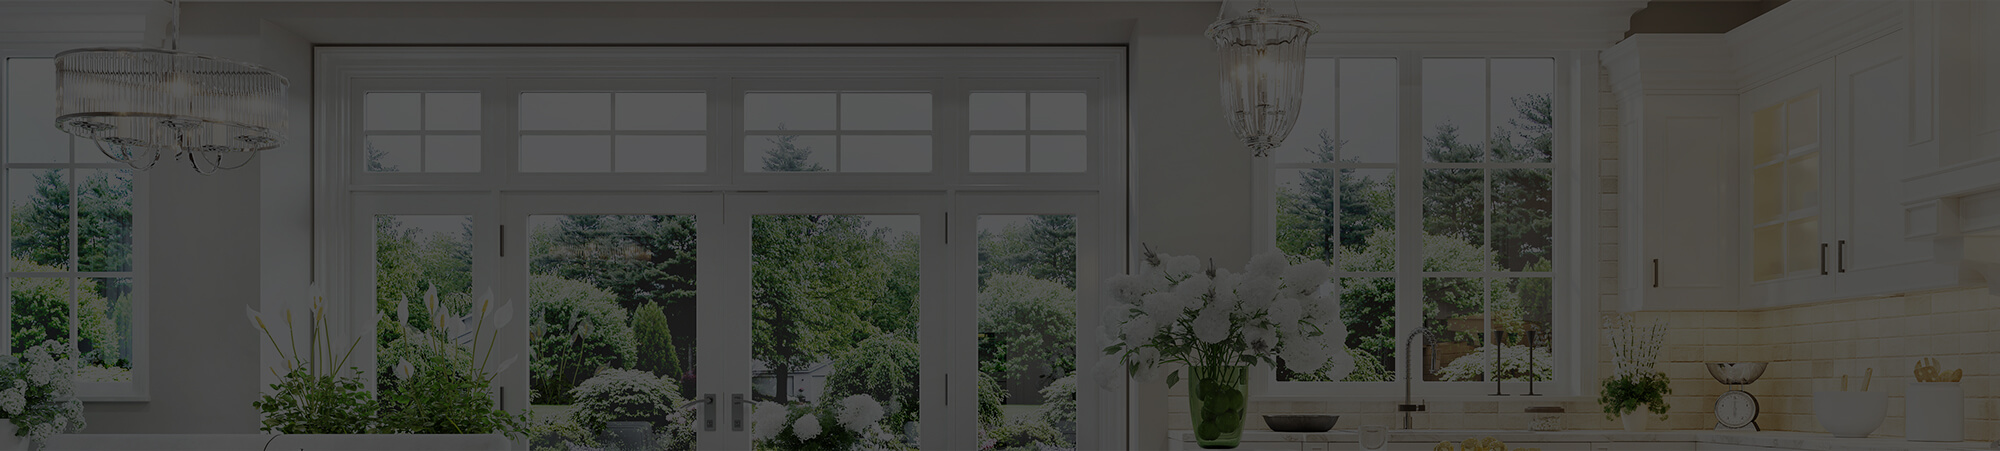 window installation and replacement services in manitowoc wi